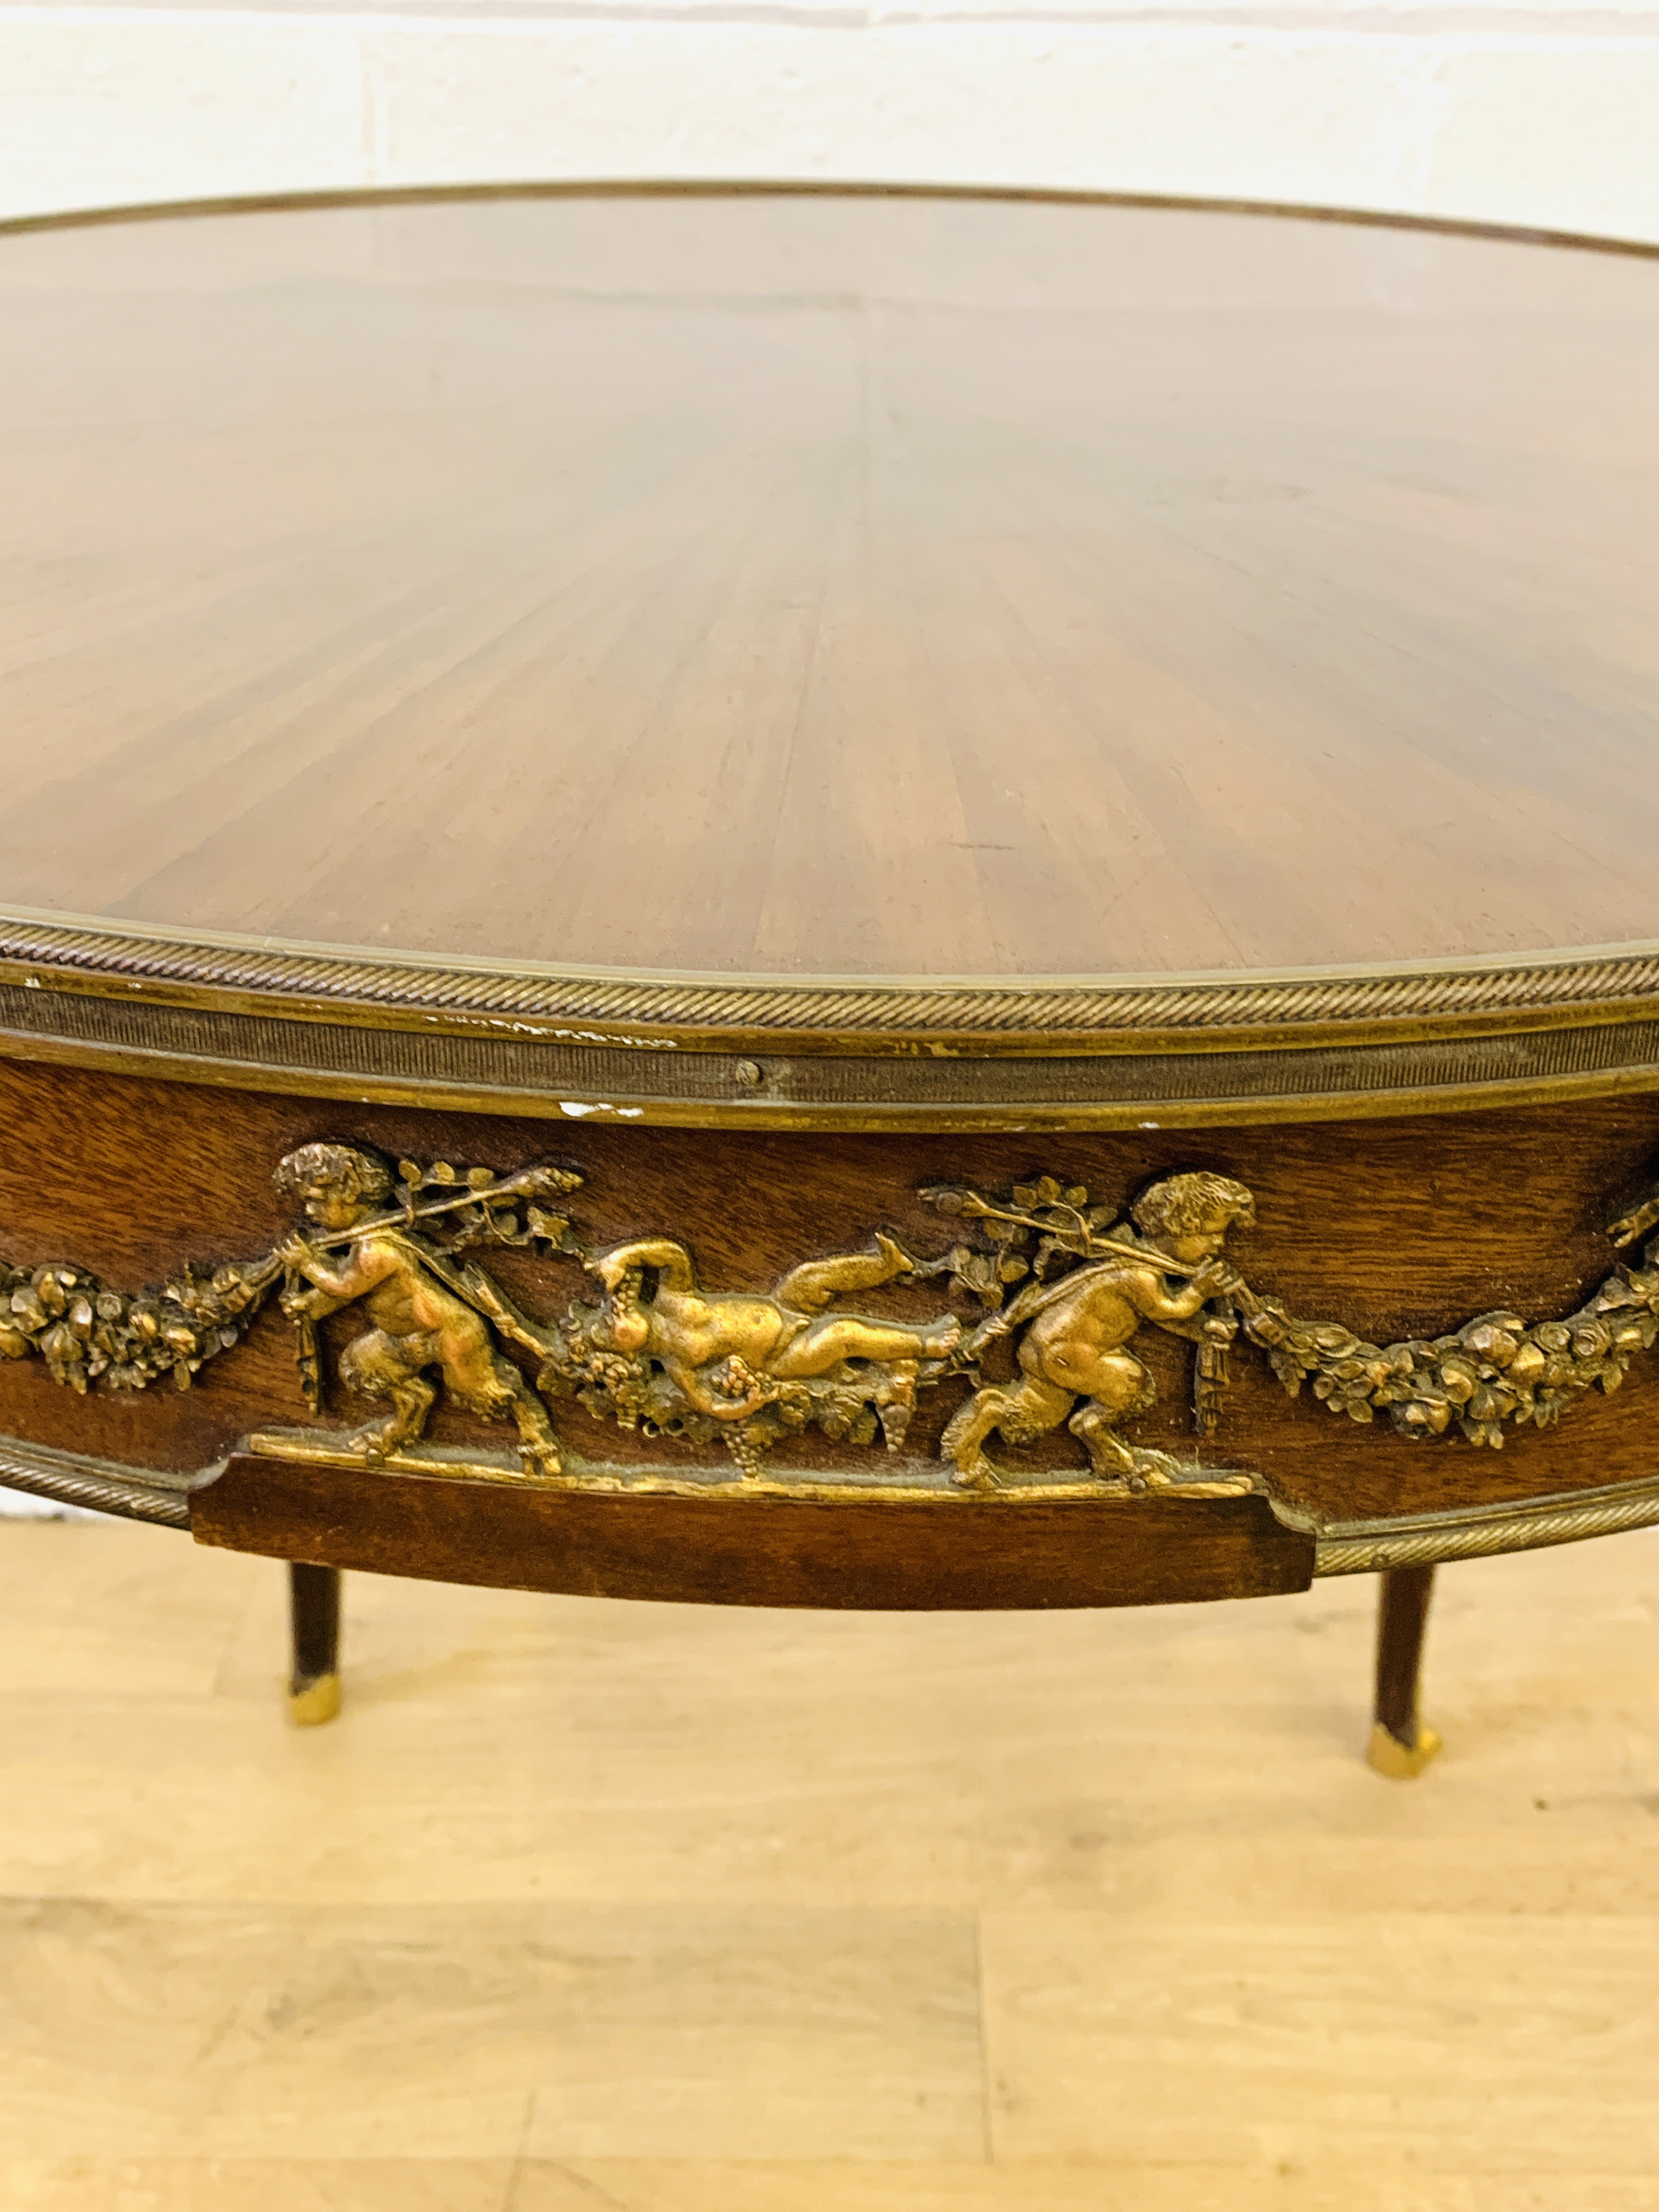 French empire style display table - Image 2 of 8